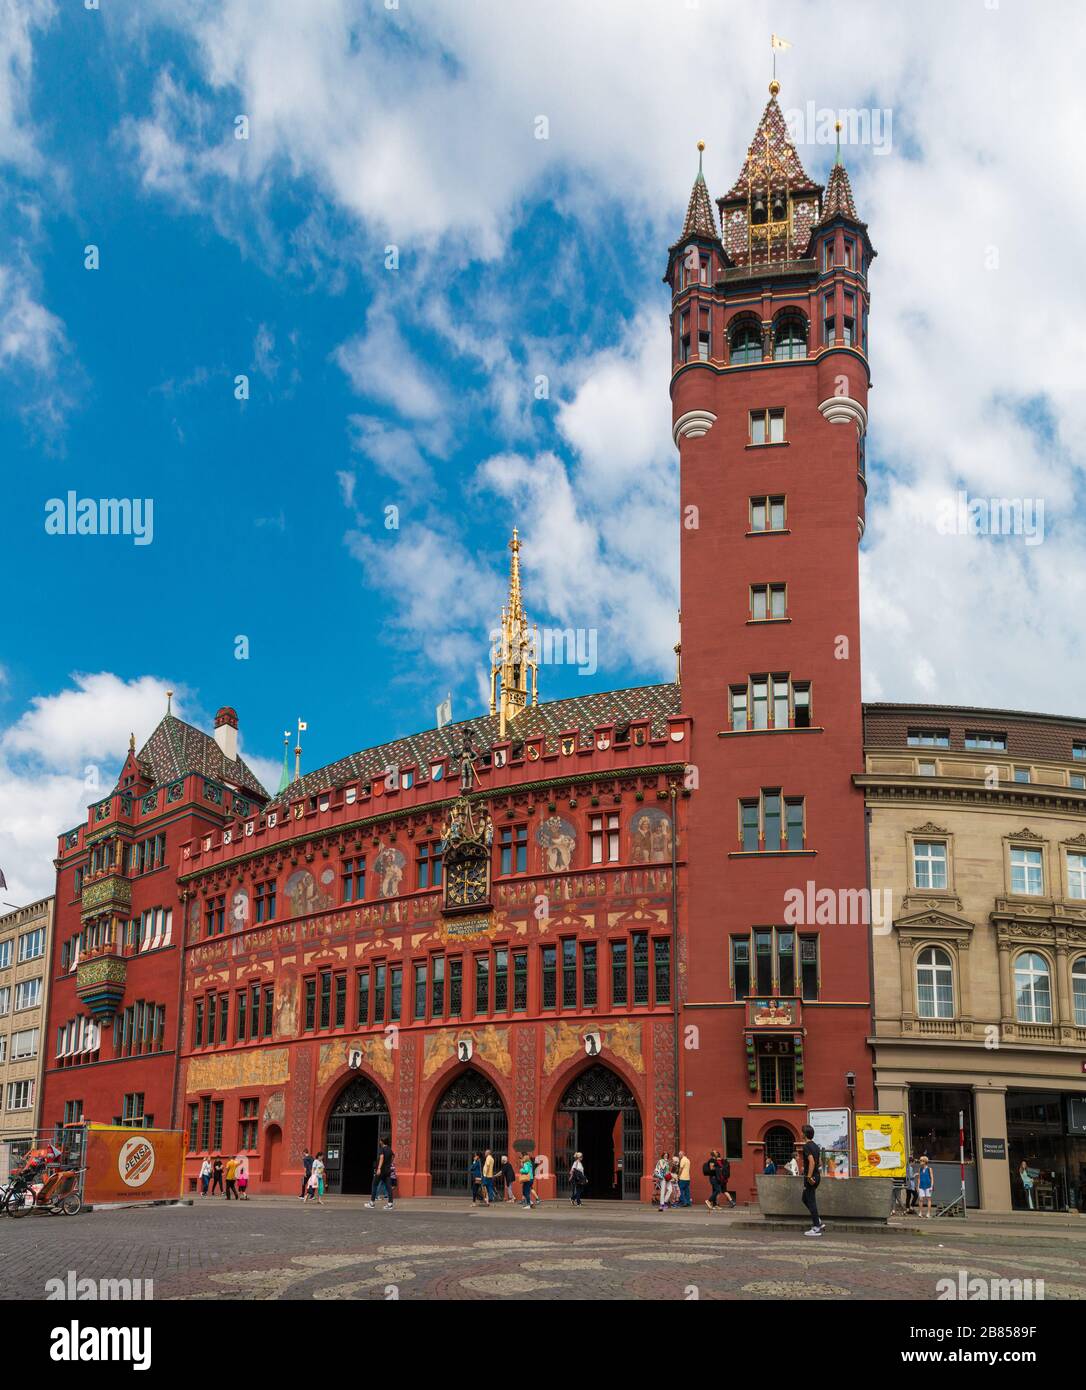 Great full view of the famous Basel Town Hall in an extreme wide-angle perspective on a nice day with blue sky. It is the seat of the Basel government... Stock Photo